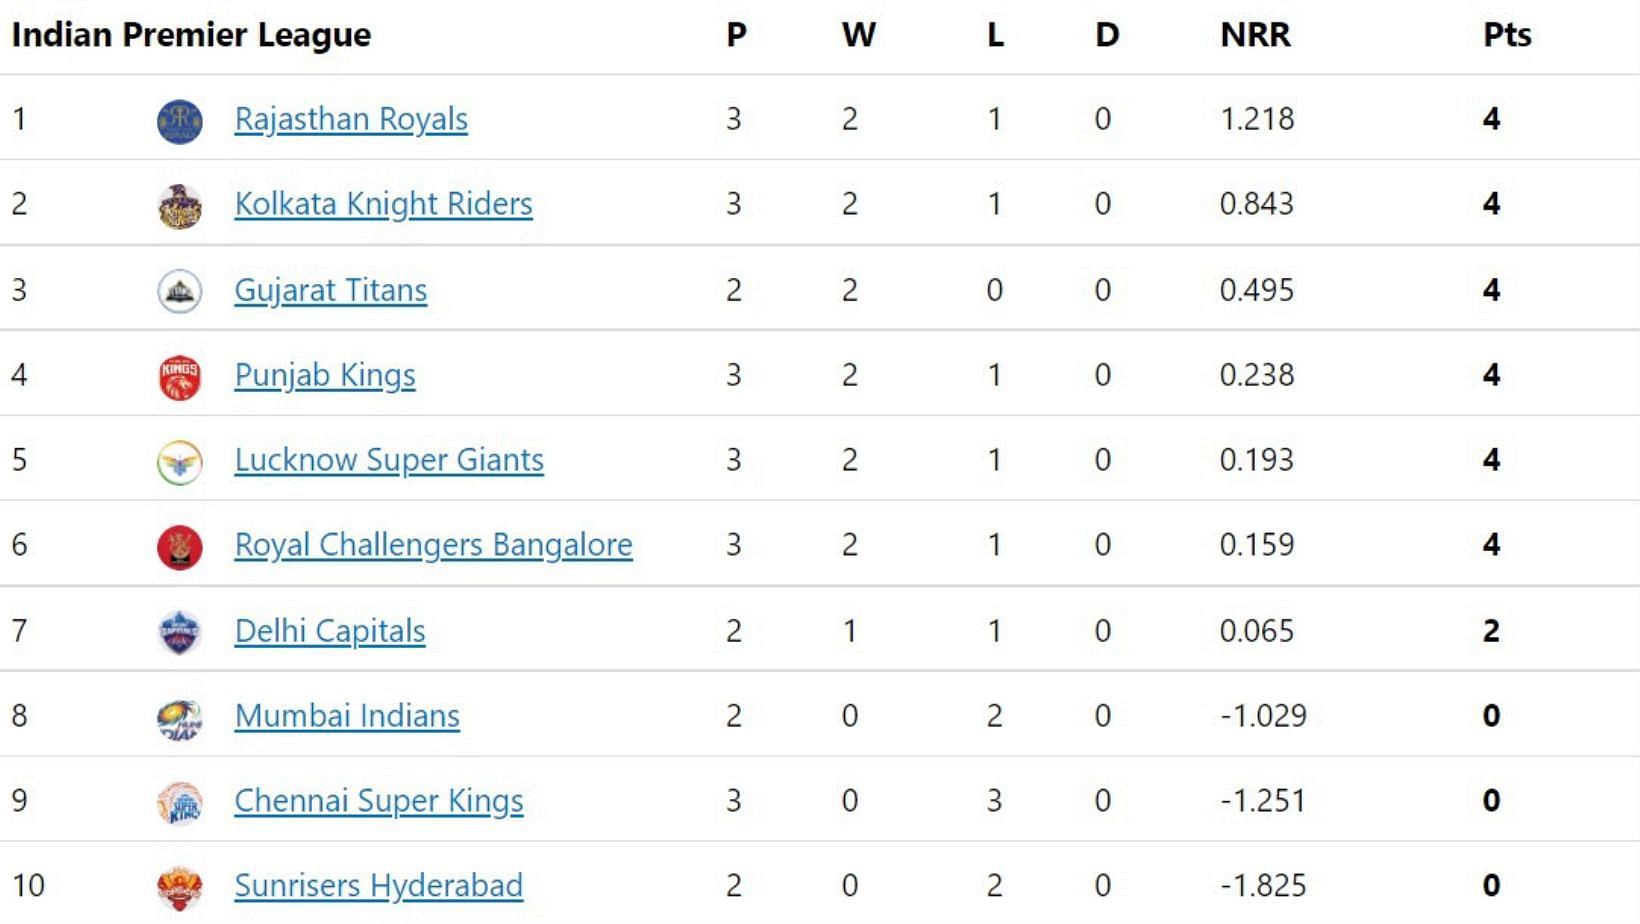 RCB jump to sixth in IPL 2022 points table.